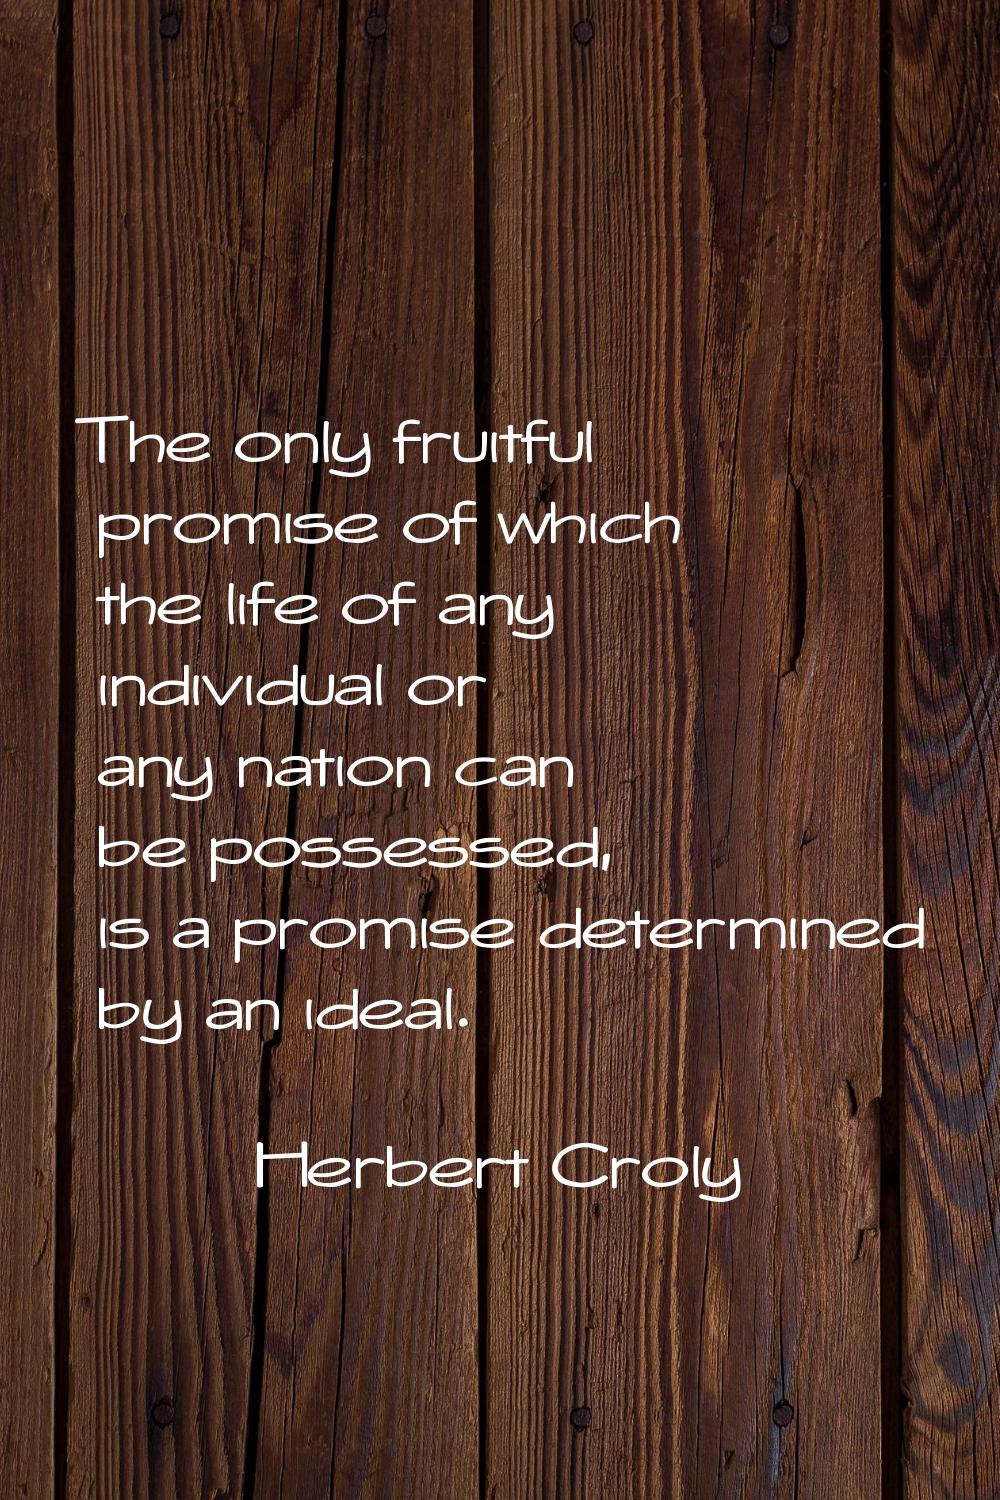 The only fruitful promise of which the life of any individual or any nation can be possessed, is a 